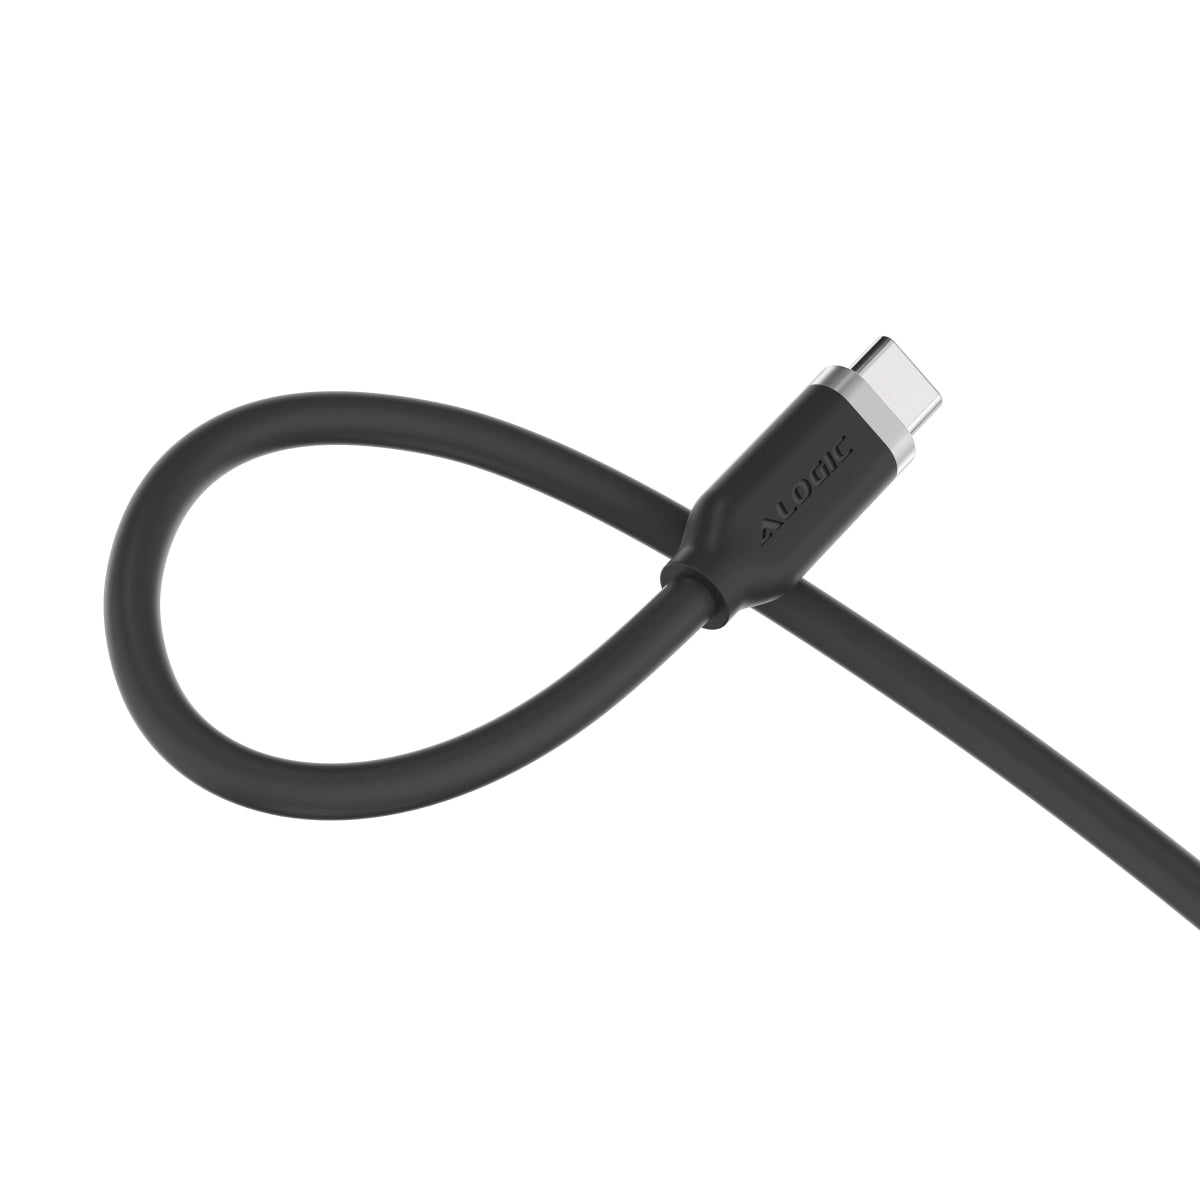 USB-C Silicone Flexible Charging Cable - 240W